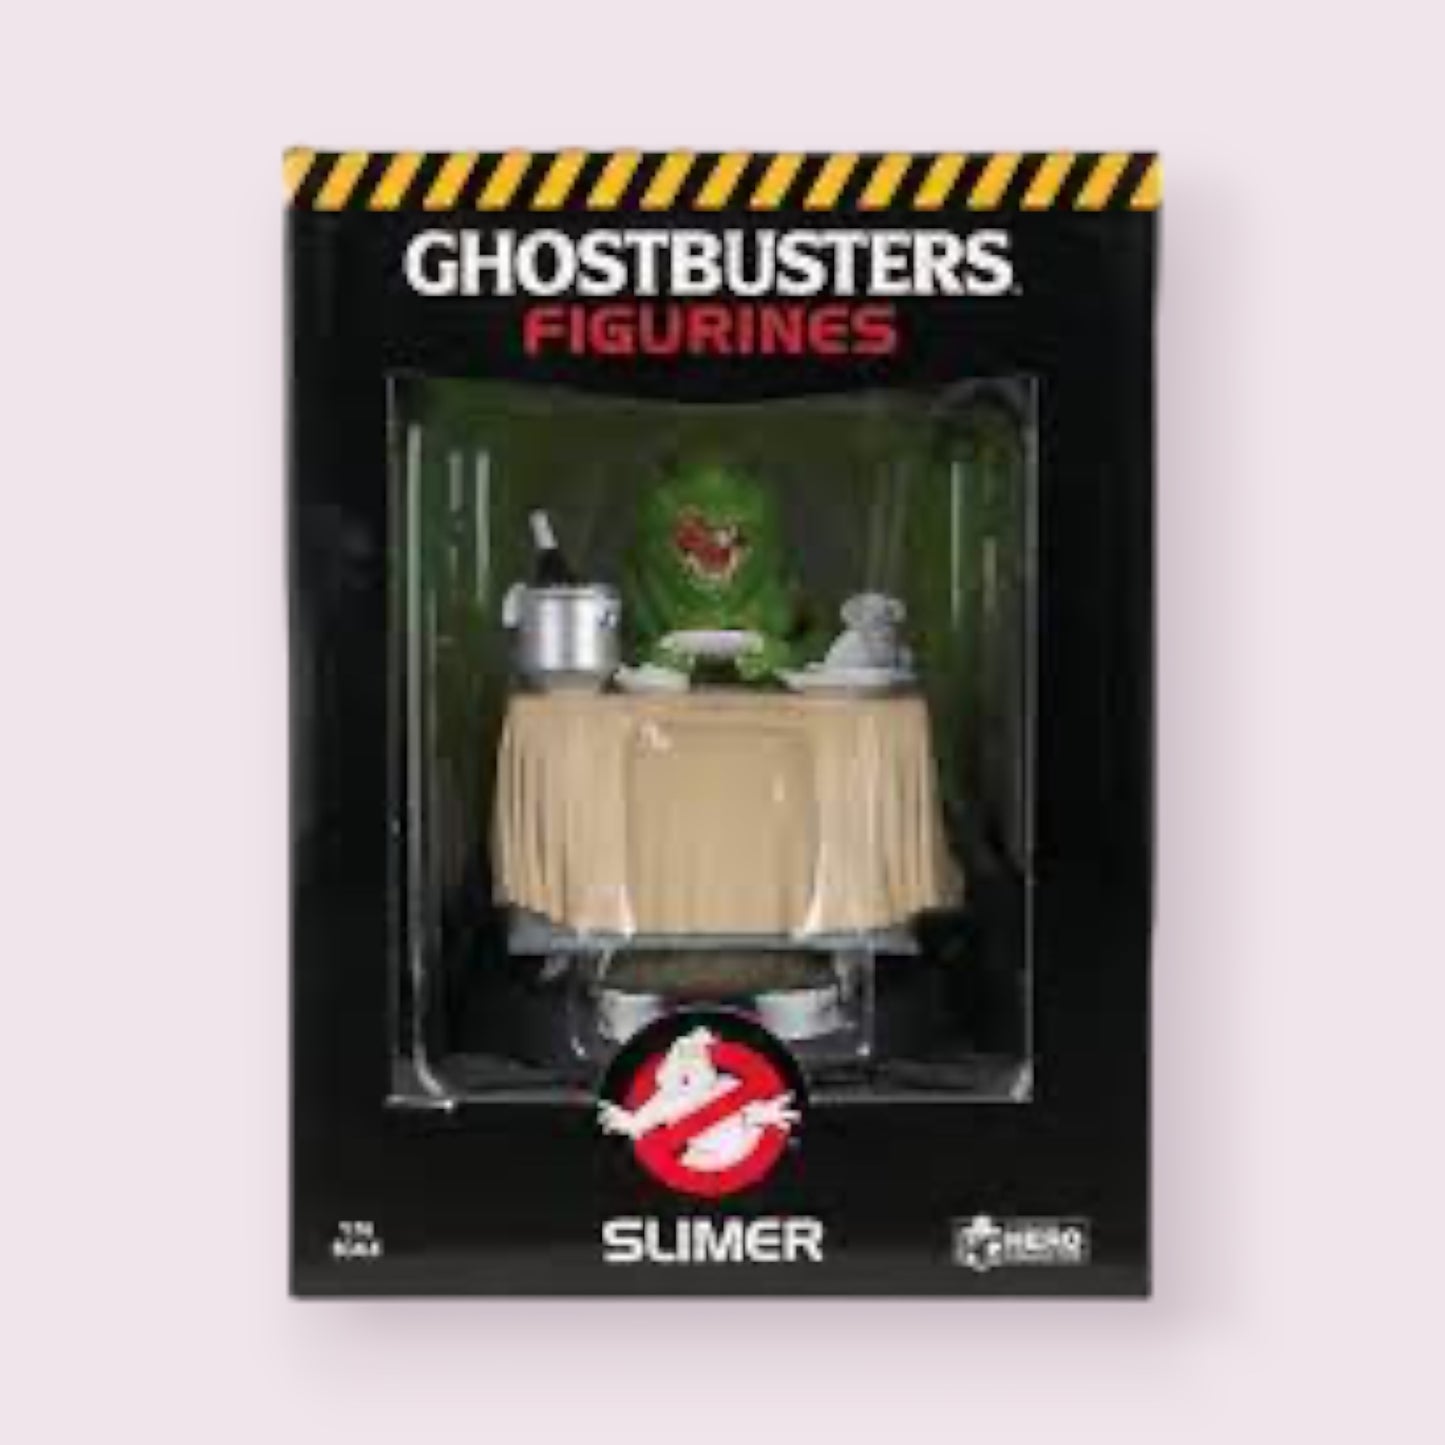 Ghostbusters Slimer Figurine  Pixie Candy Shoppe   